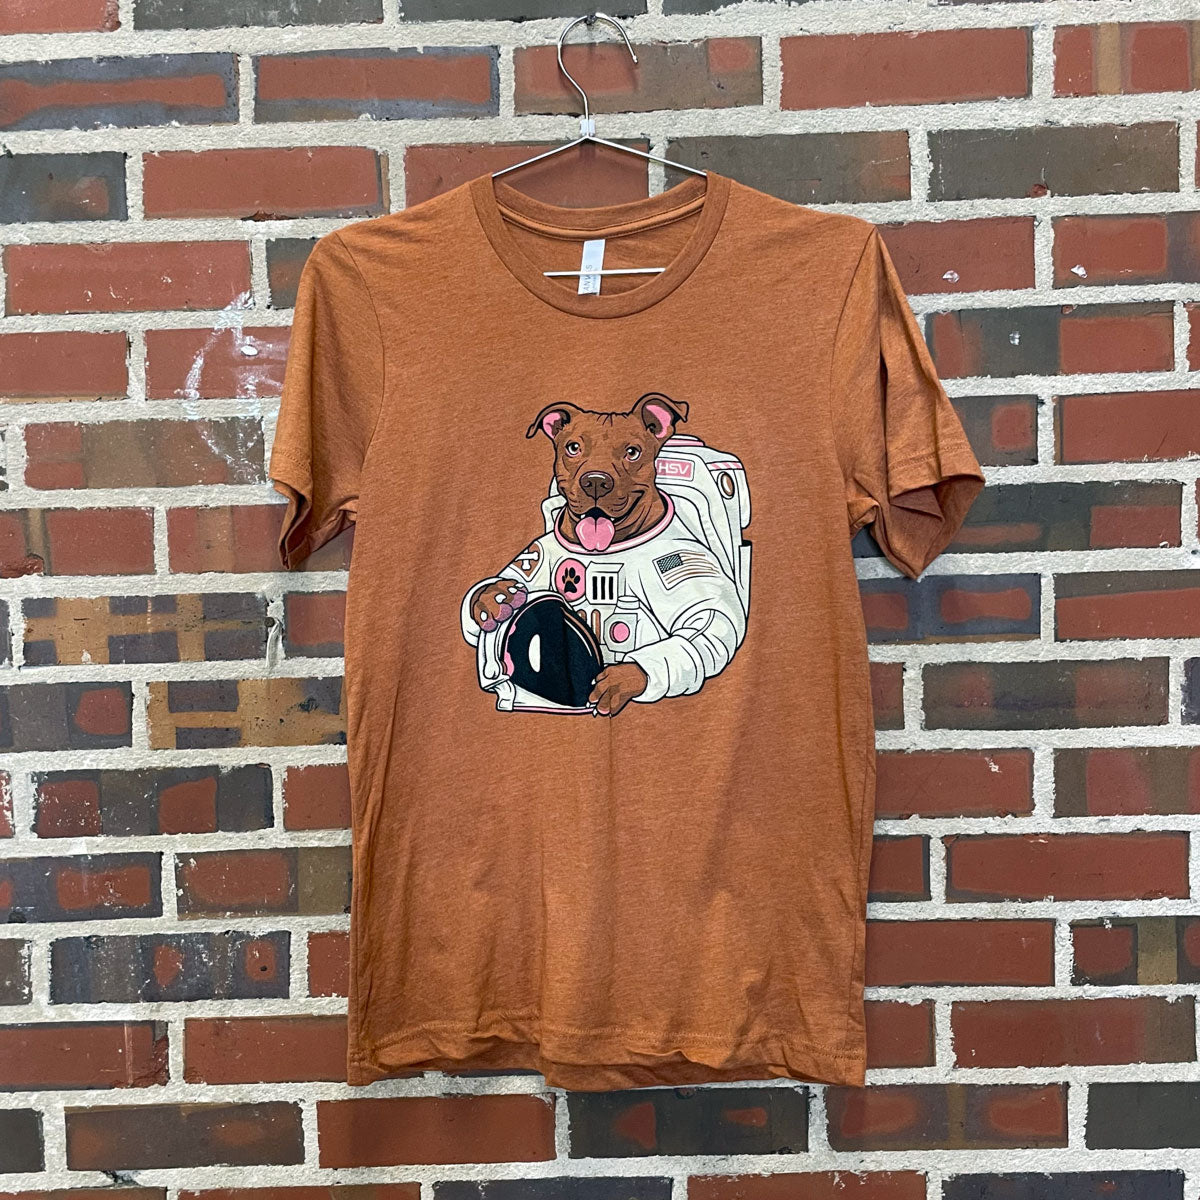 Pit bull mix dog dressed as astronaut design on warm heather brown t-shirt hanging against brick wall at Lowe Mill